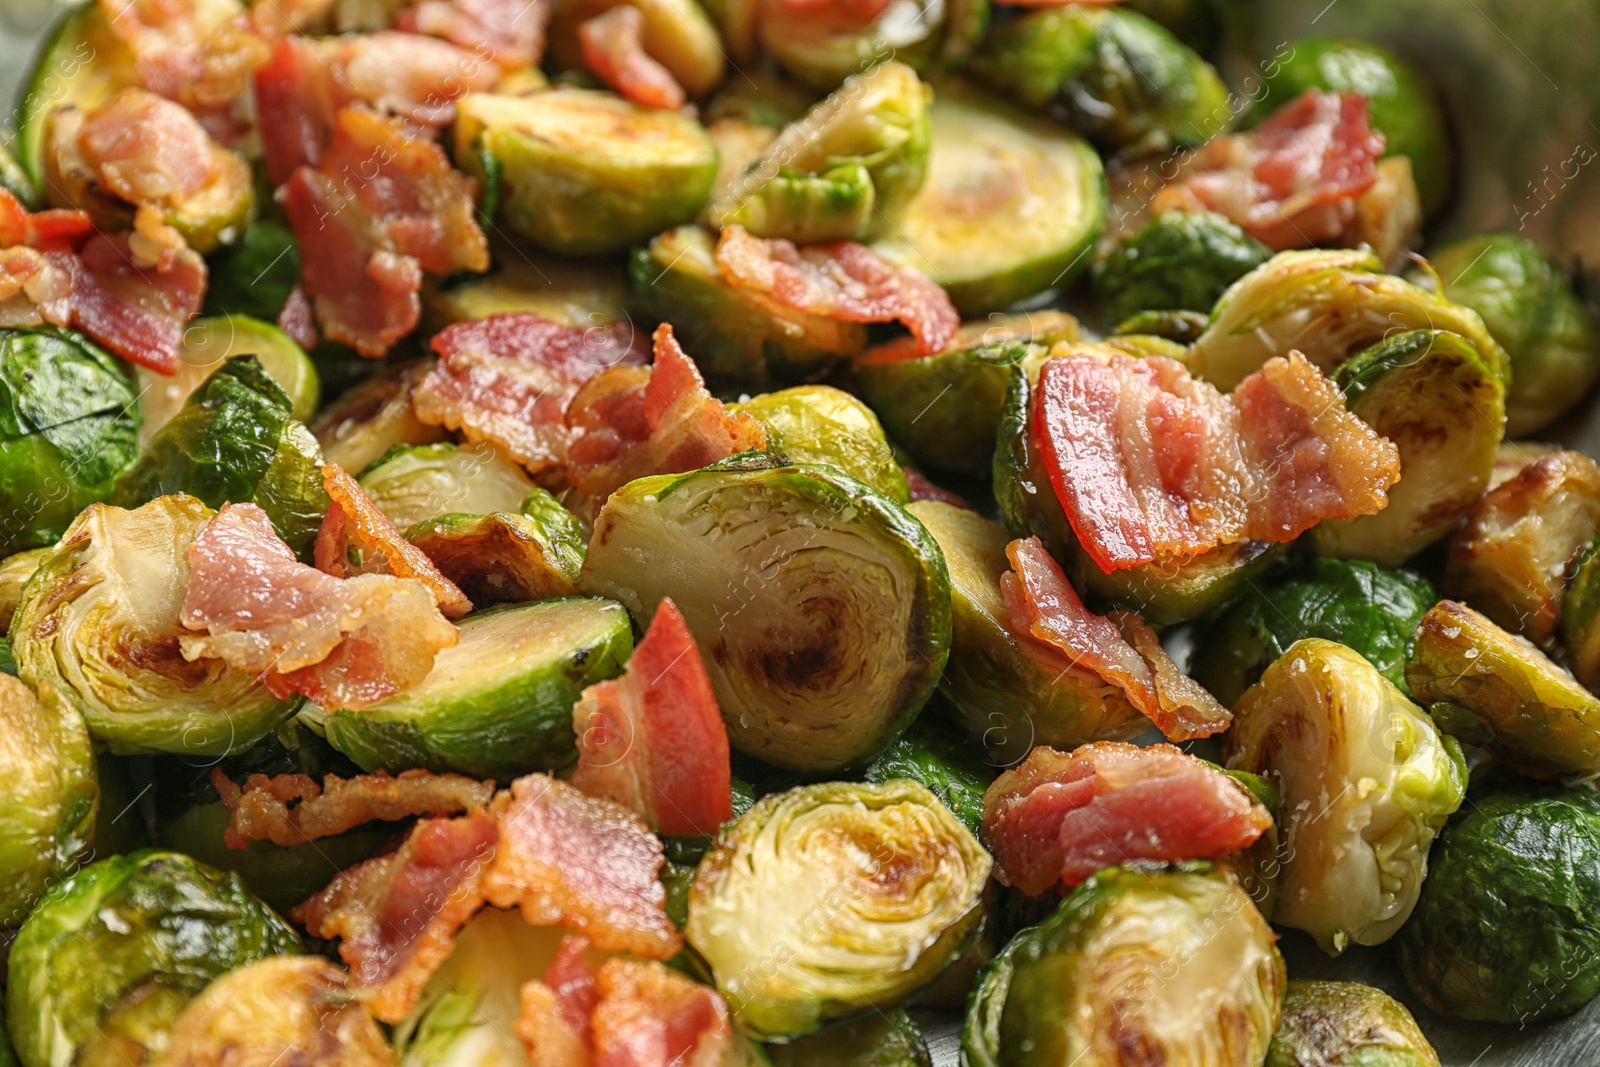 Photo of Delicious roasted Brussels sprouts with bacon as background, closeup